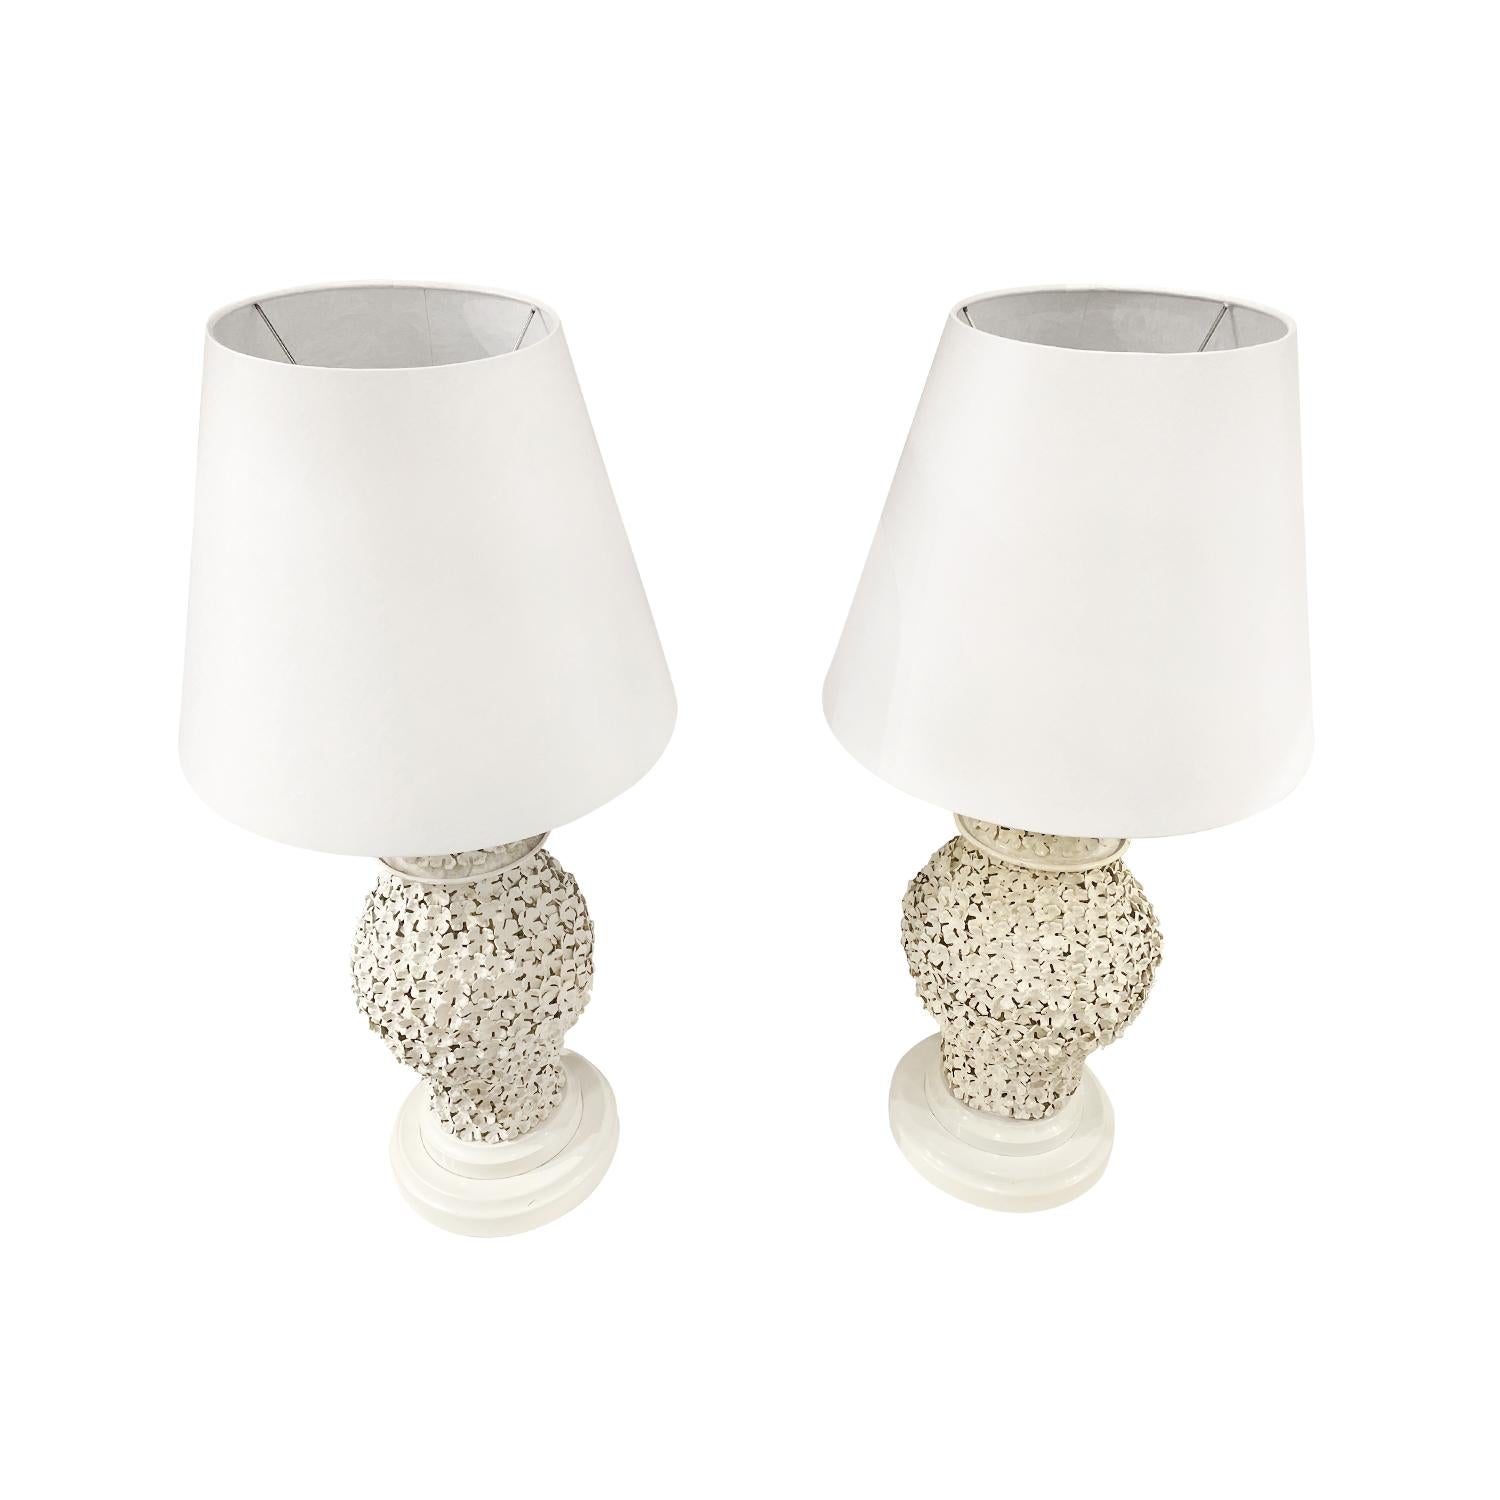 A white, vintage Art Deco French pair of tall table lamps with a new white round shade, made of hand crafted porcelain and metal, in good condition. The sculptural lights are particularized by floral decoration, featuring a two light socket. The